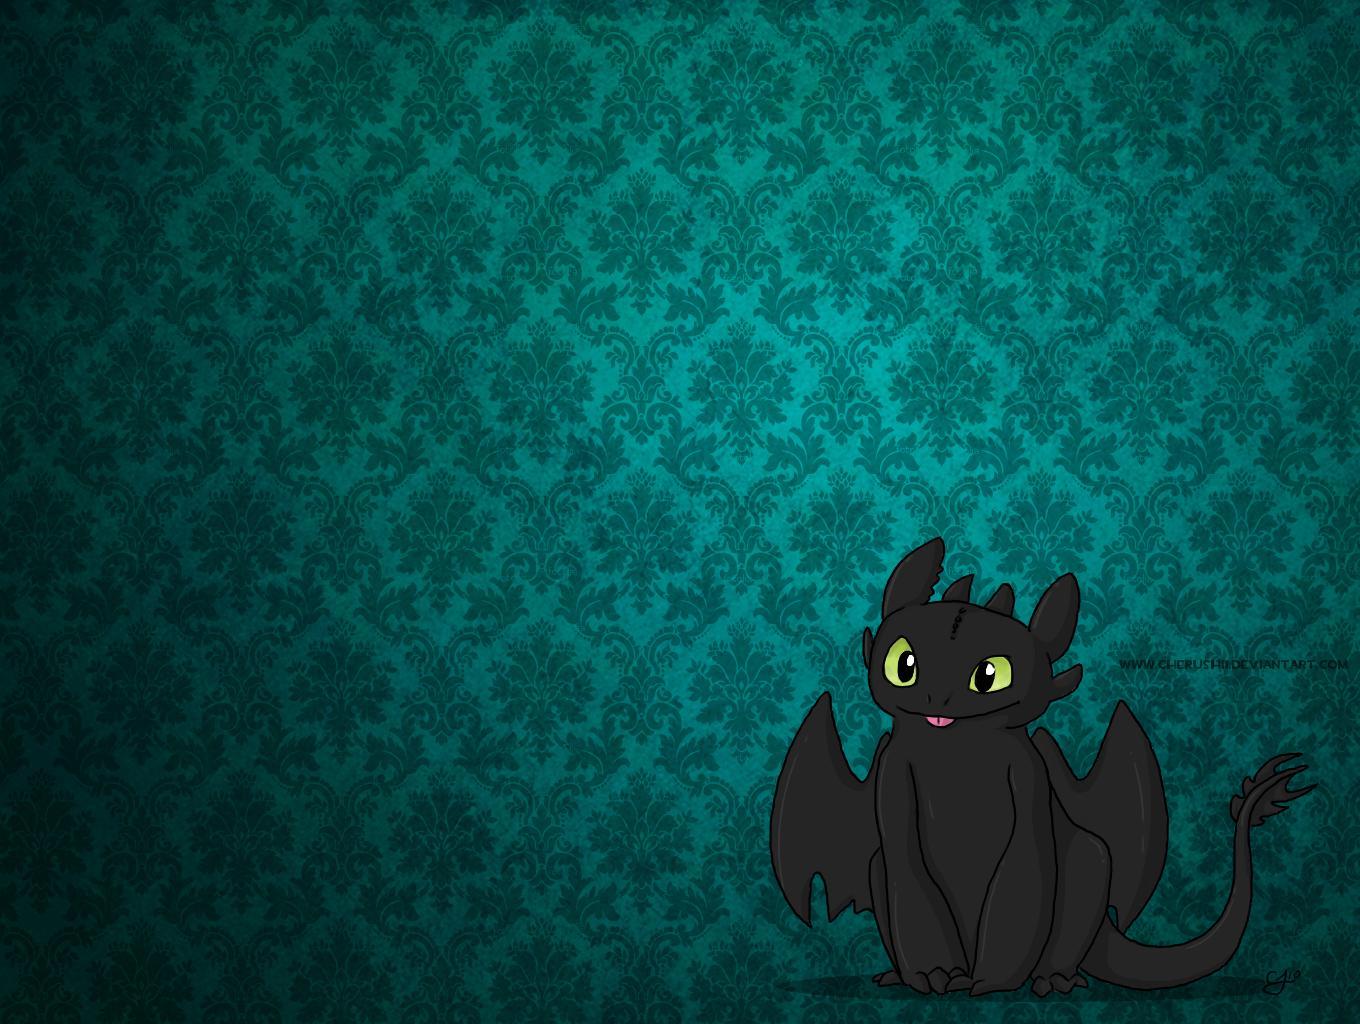 Toothless Full HD Quality Image, Toothless Wallpaper